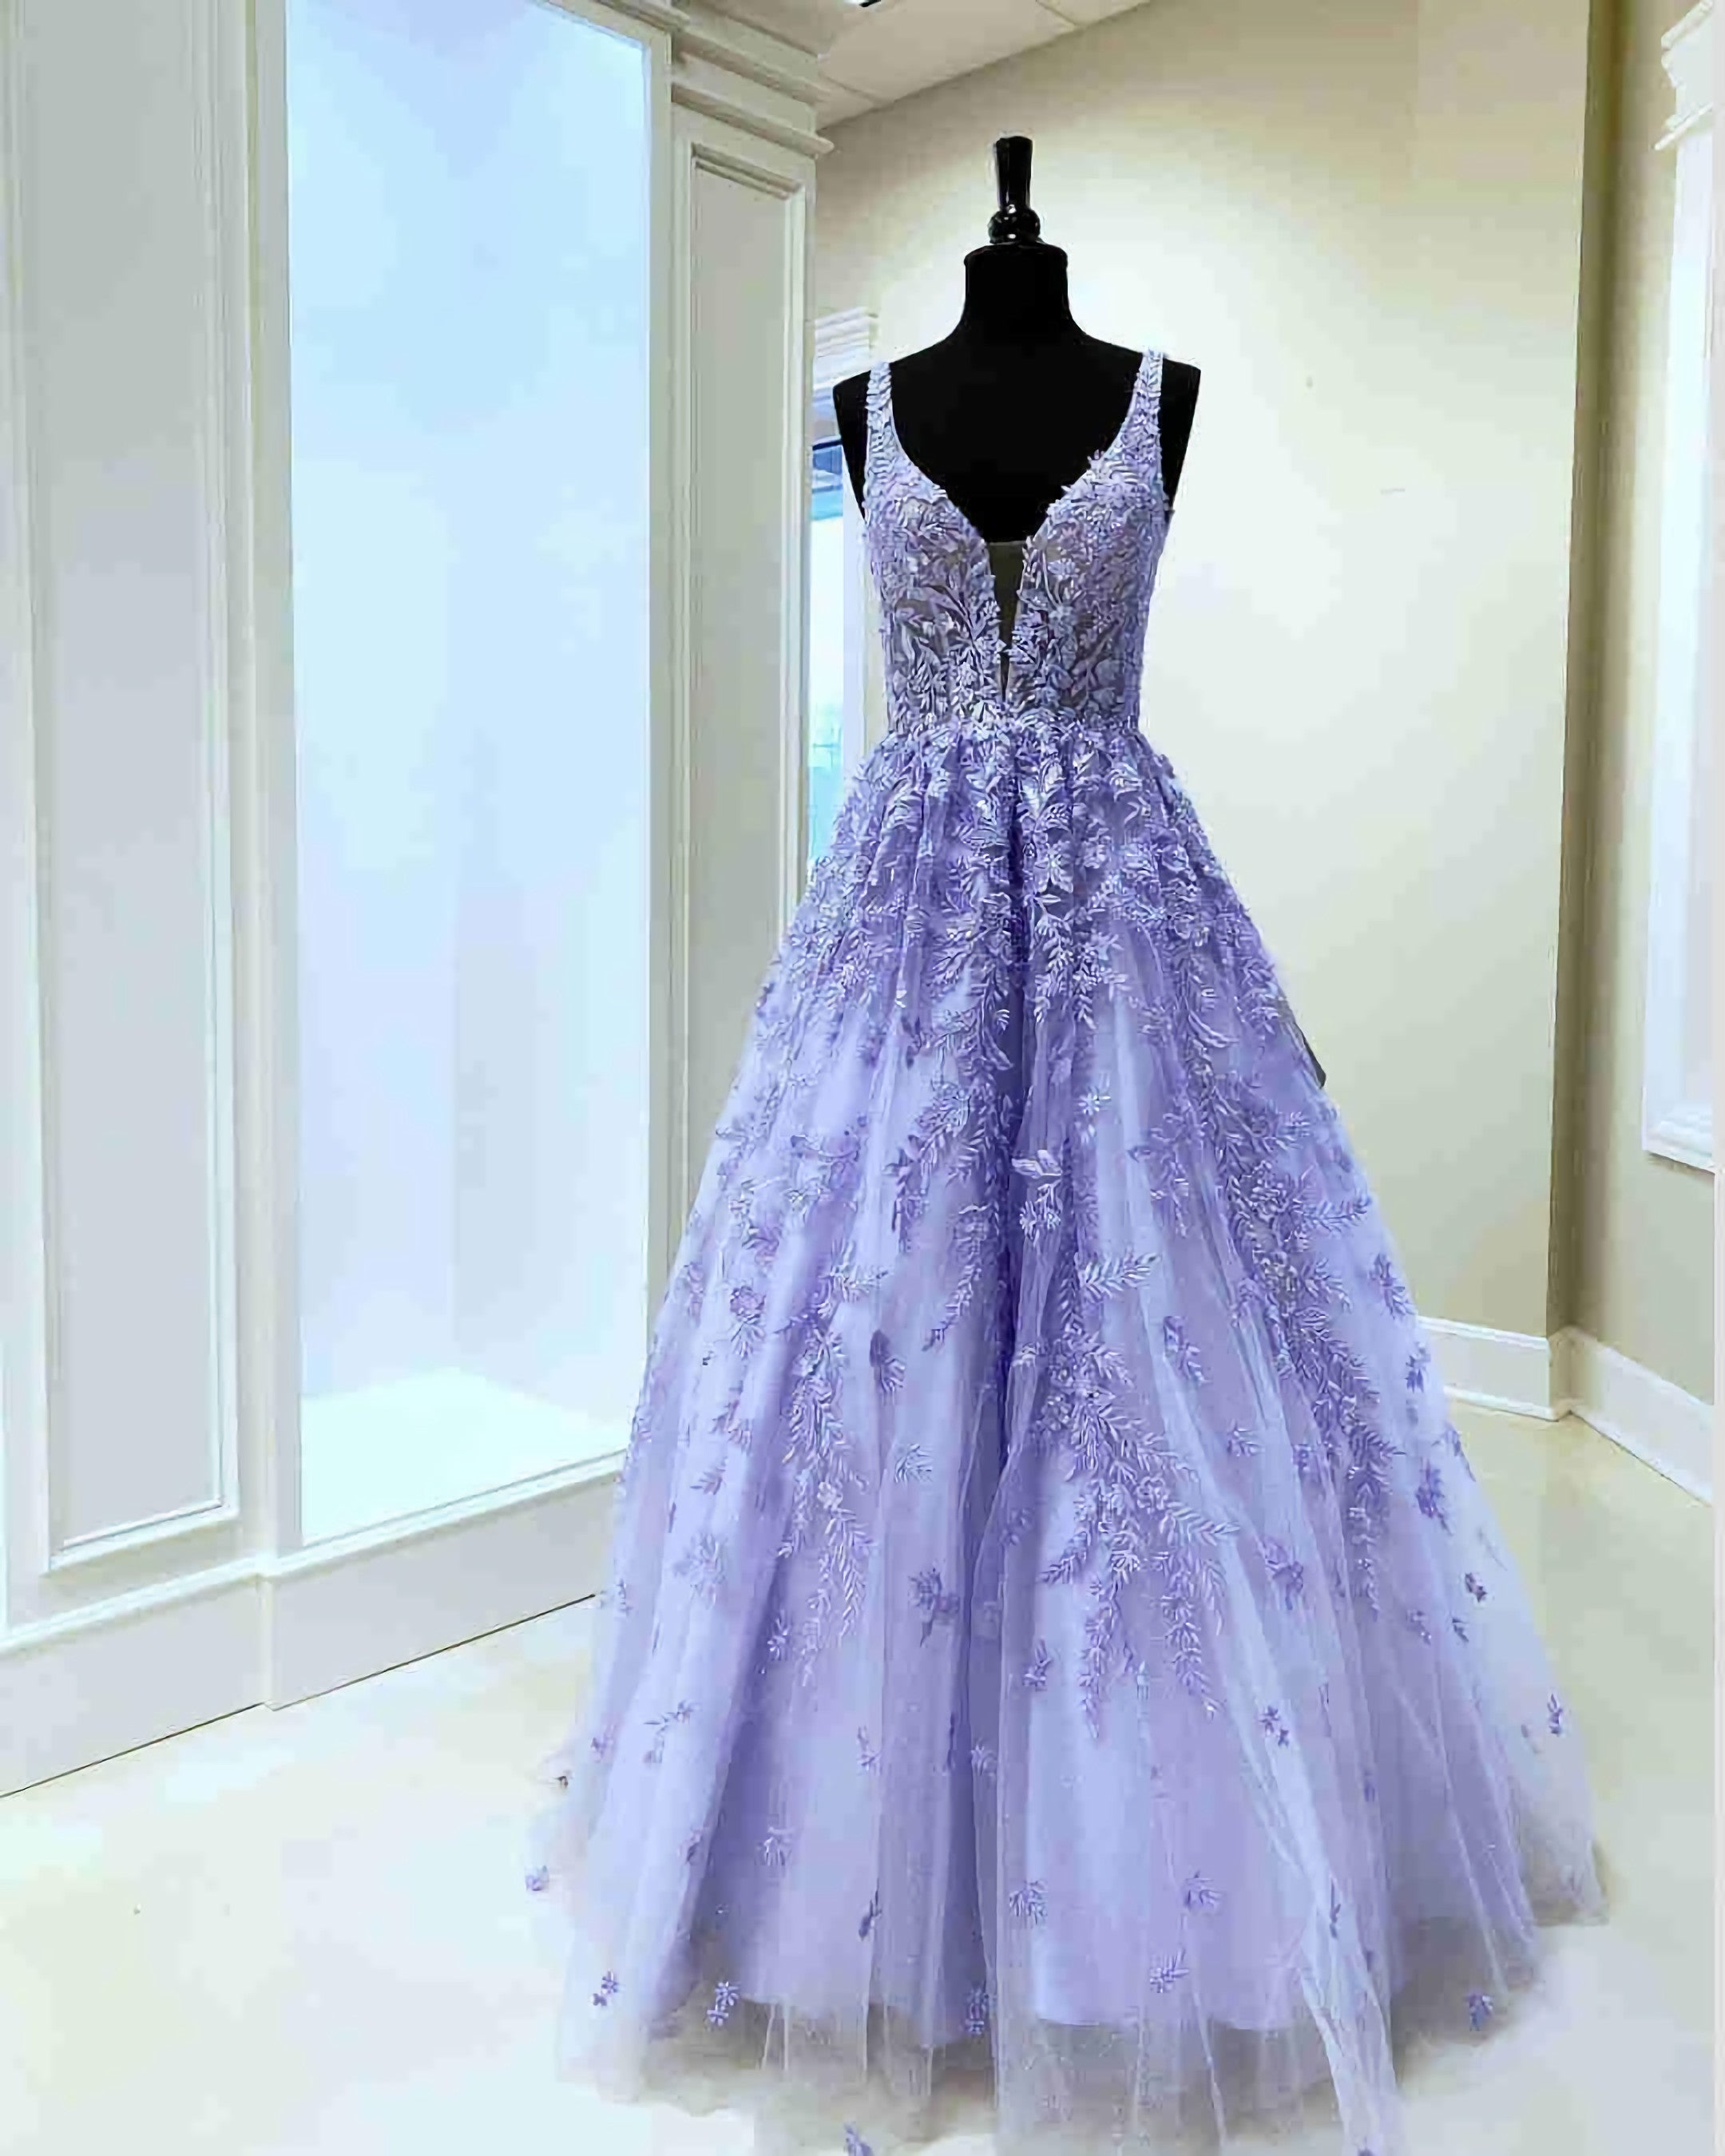 Cocktail Party Outfit, Gorgeous V Neck Embroidery Lavender Long Prom Dress